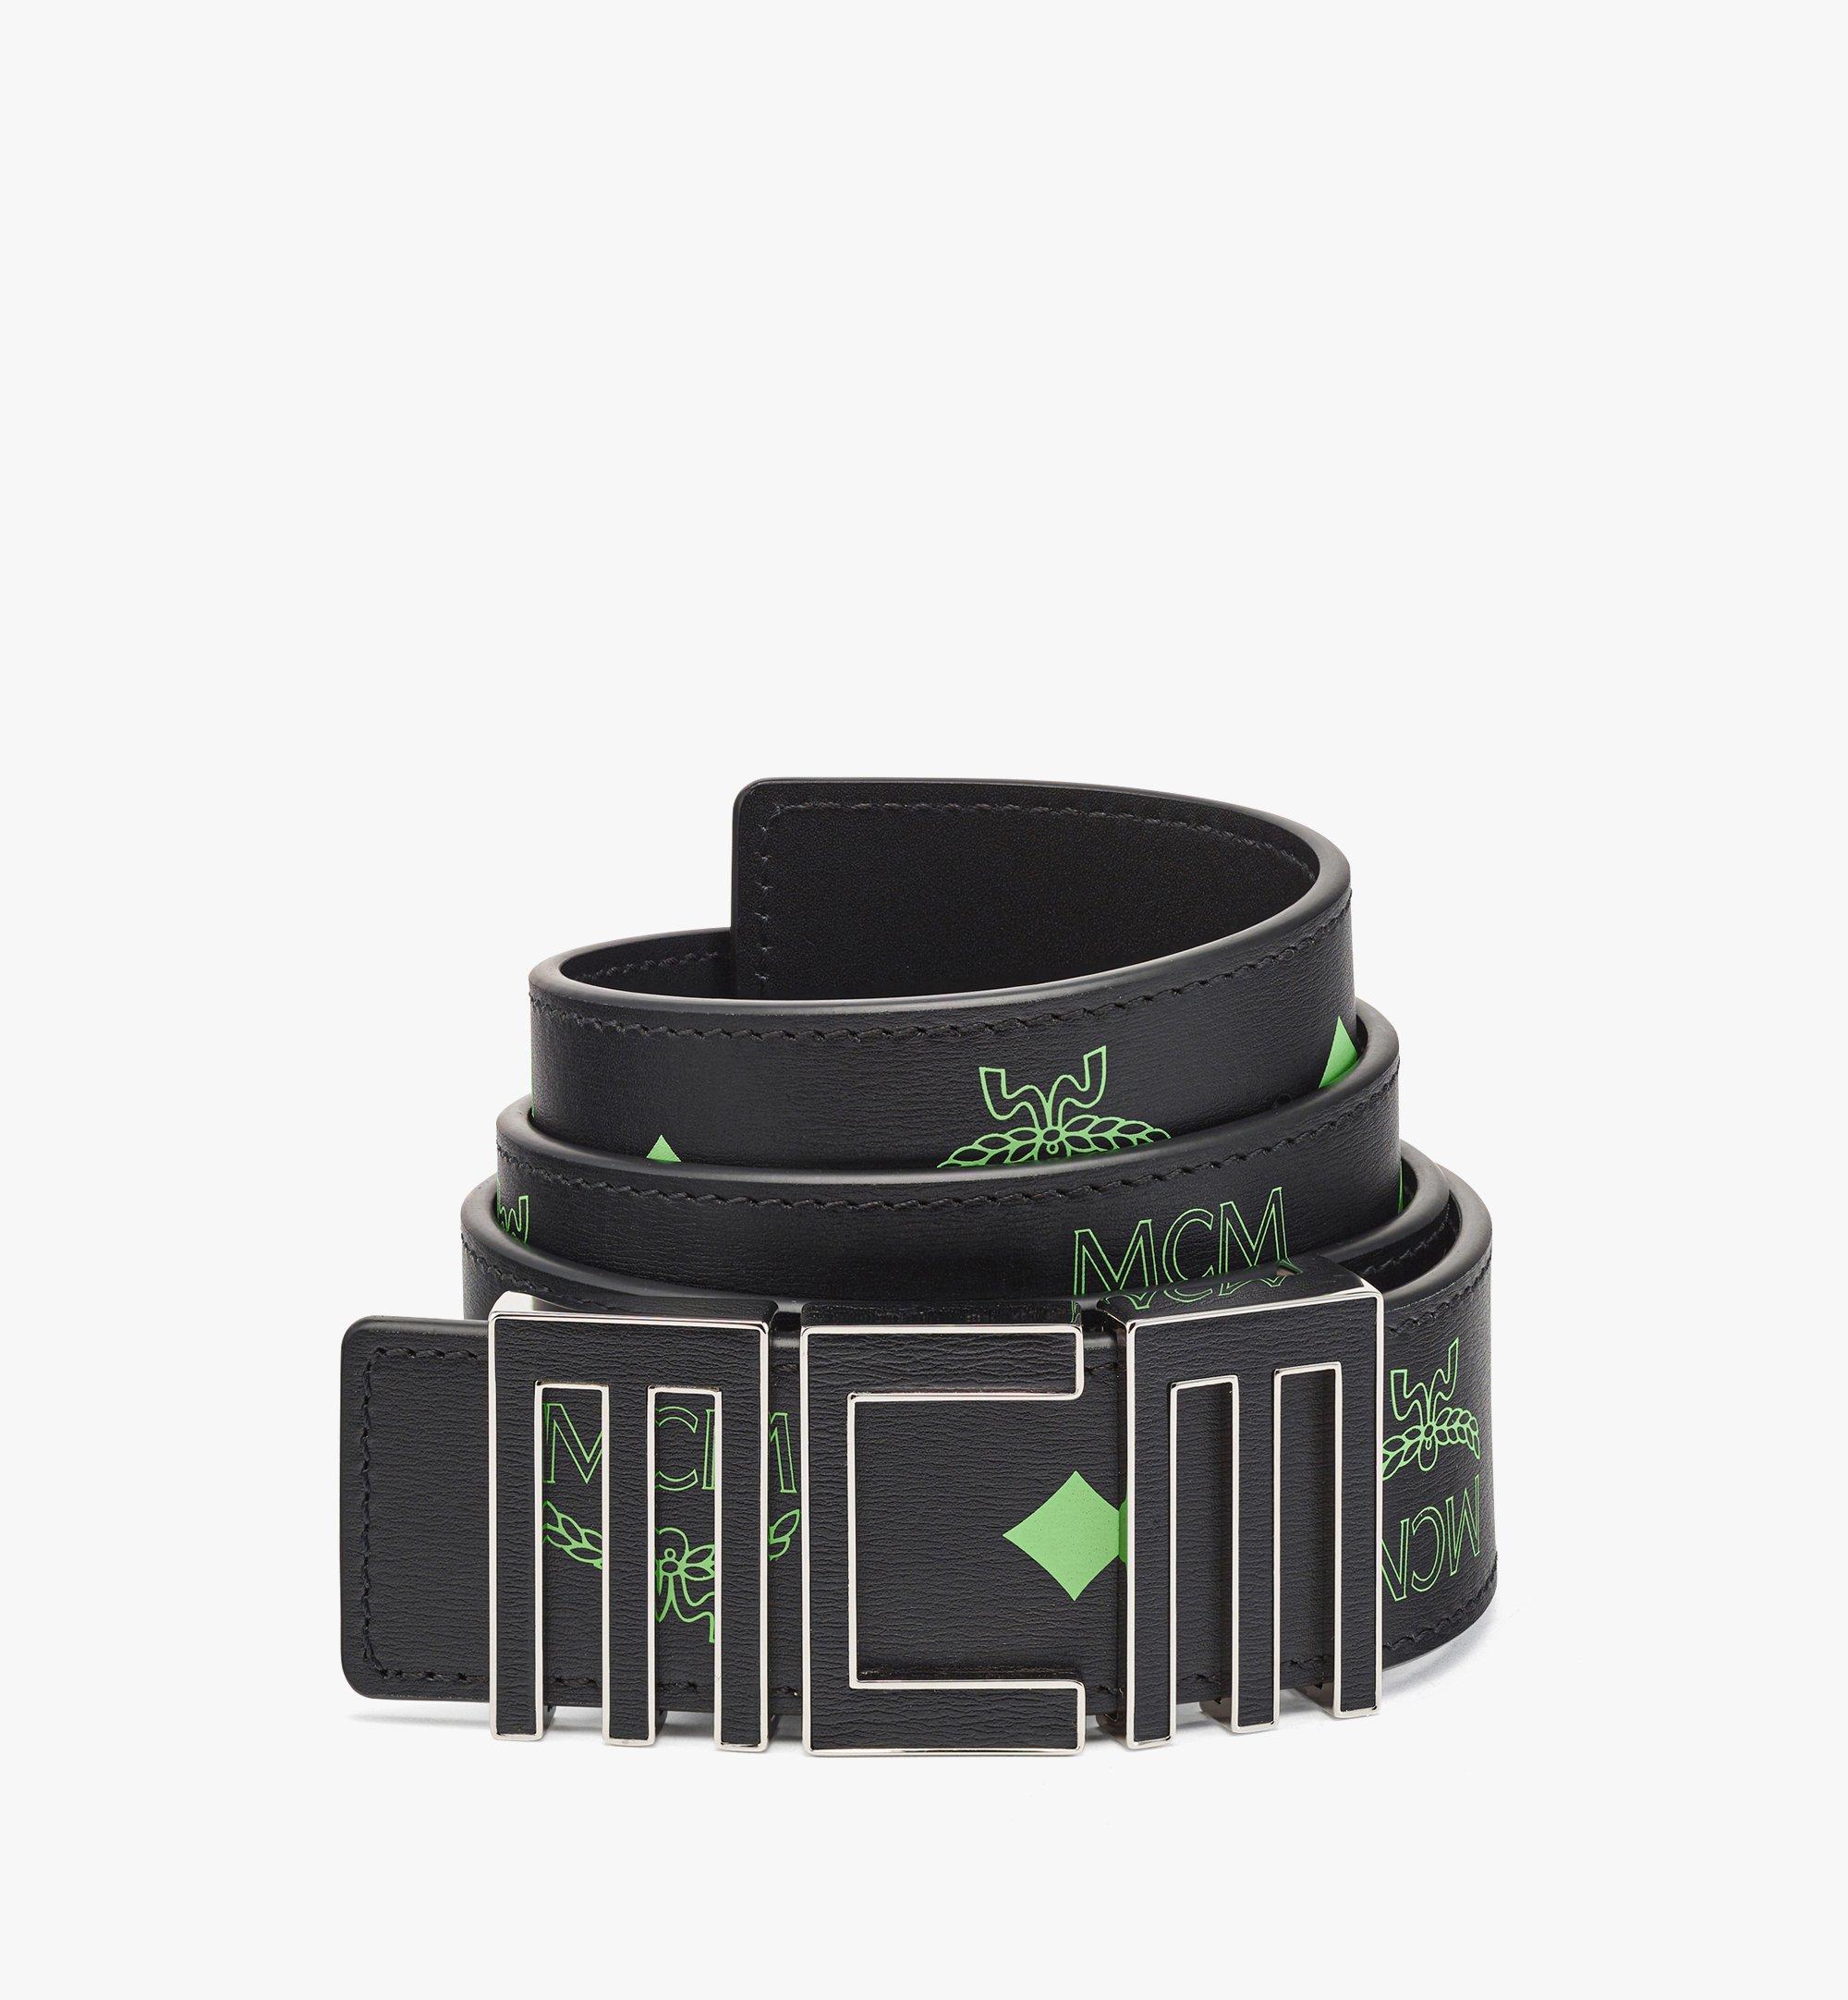 MCM Leather Inlay Tech MCM Belt 1.5” in Embossed Leather Green MXBCSTC03JW110 Alternate View 1